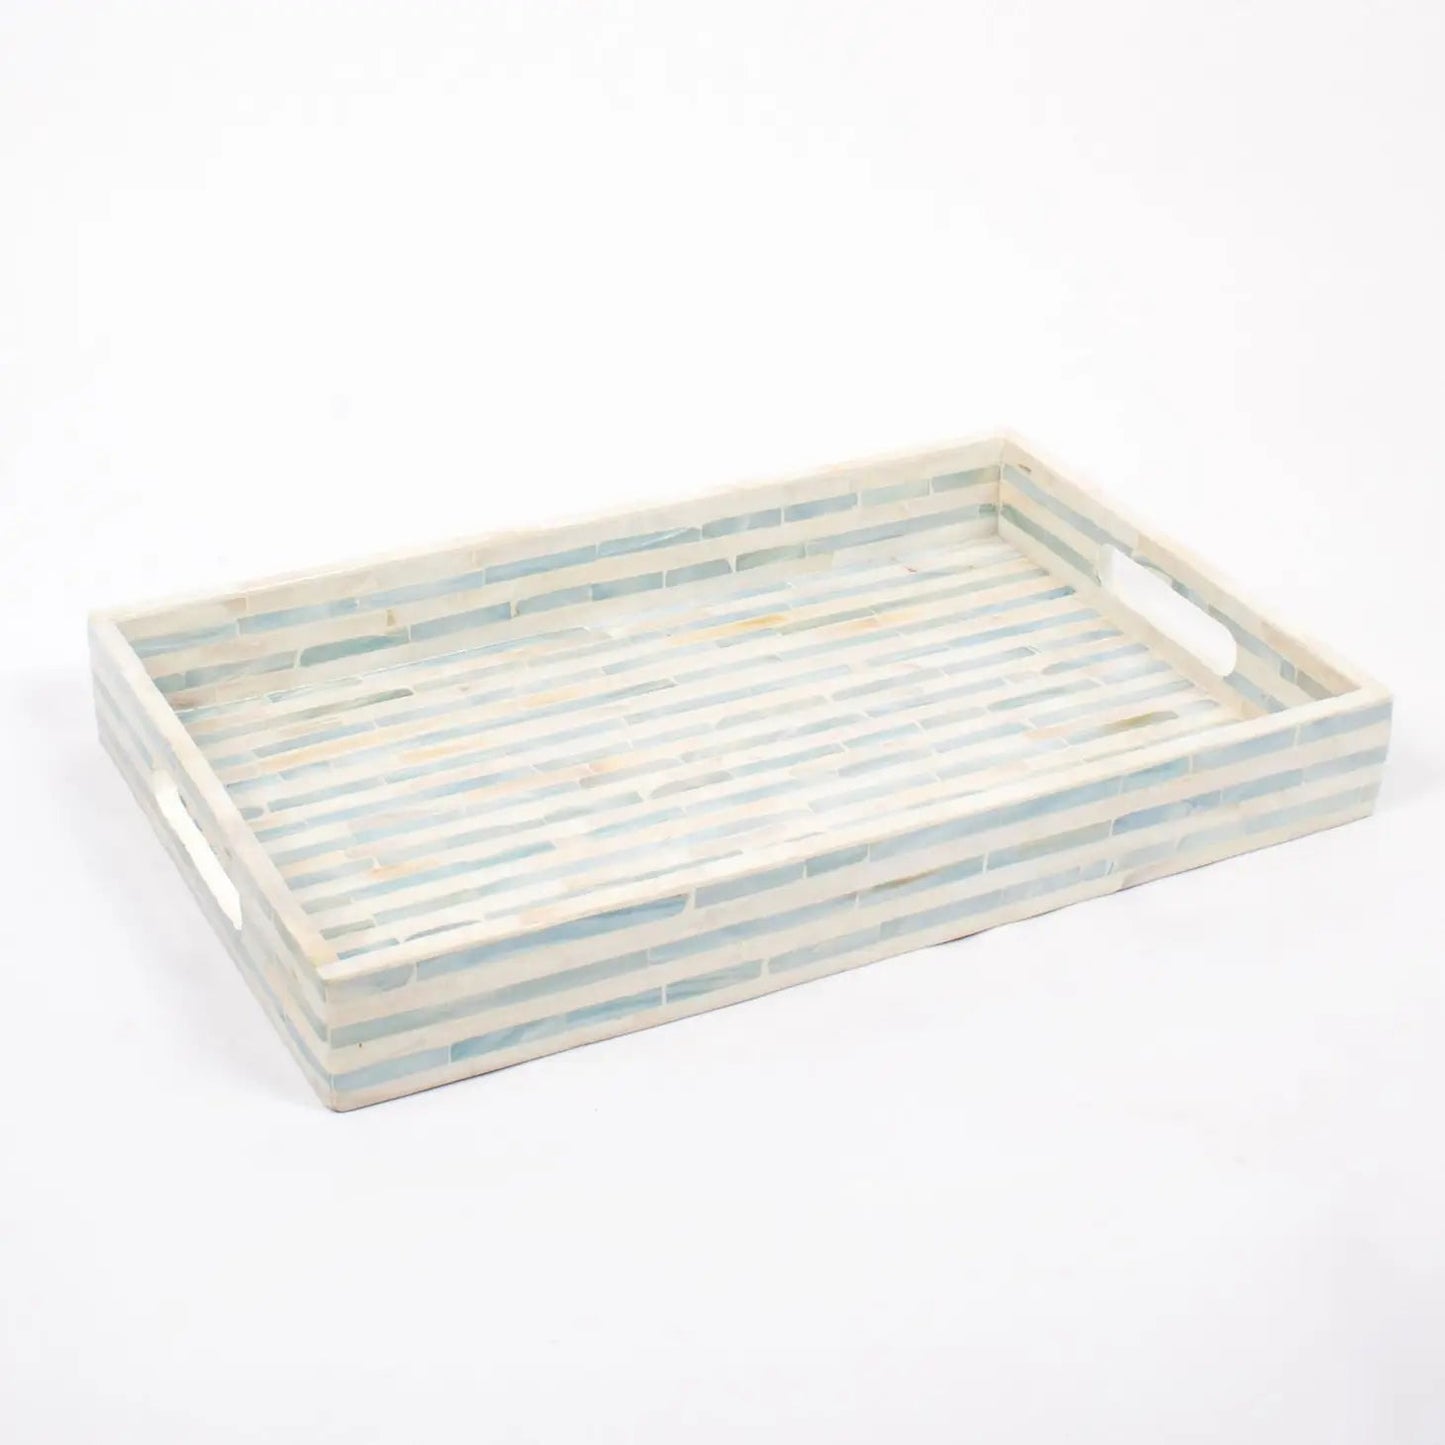 Striped Mother of Pearl Tray - Mindful Living Home